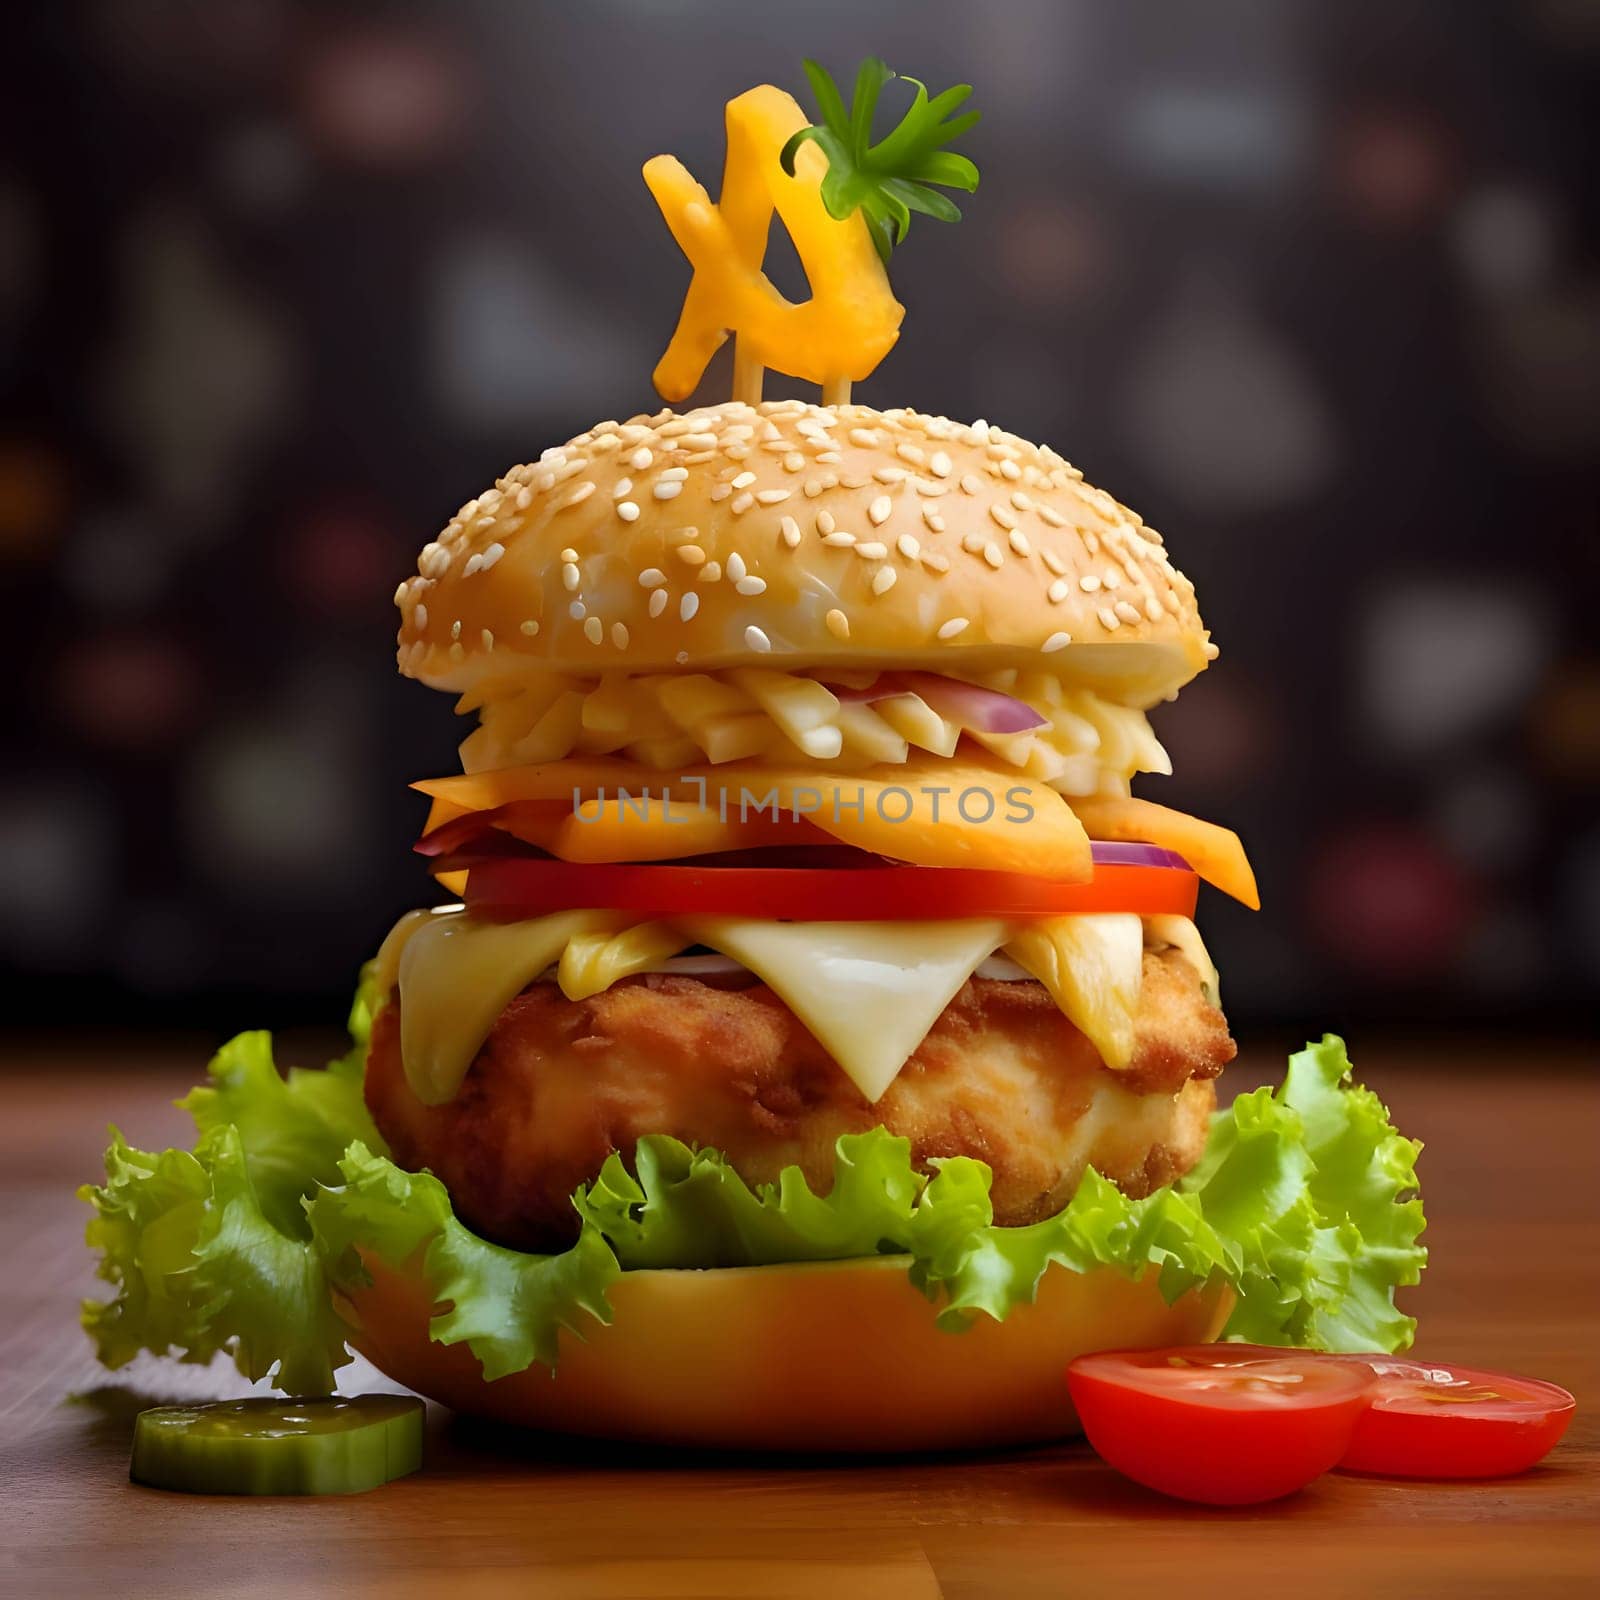 A compact chicken burger featuring crisp lettuce, melted cheese, and juicy tomato. Despite its size, this flavorful combination promises a satisfying bite.